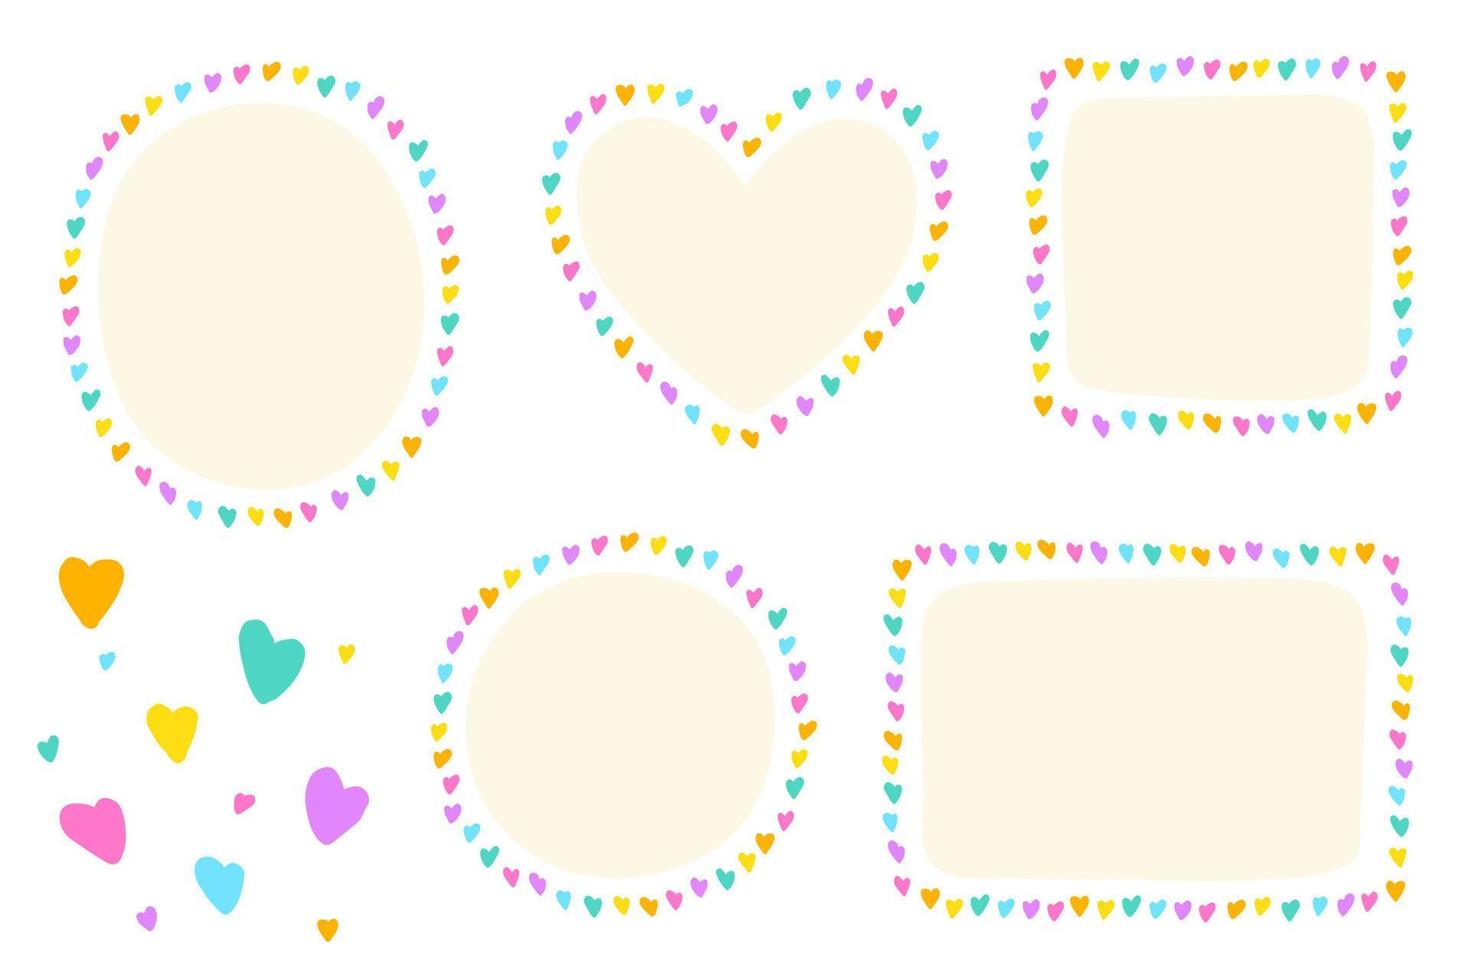 Bright Heart Love Valentines Day Dot Dash Doodle Hand Drawing Drawn Heart Circle Square Oval Rectangle Sticky note Shape Borders Frames Plate Sticky Note Set Collection Background Vector Illustration